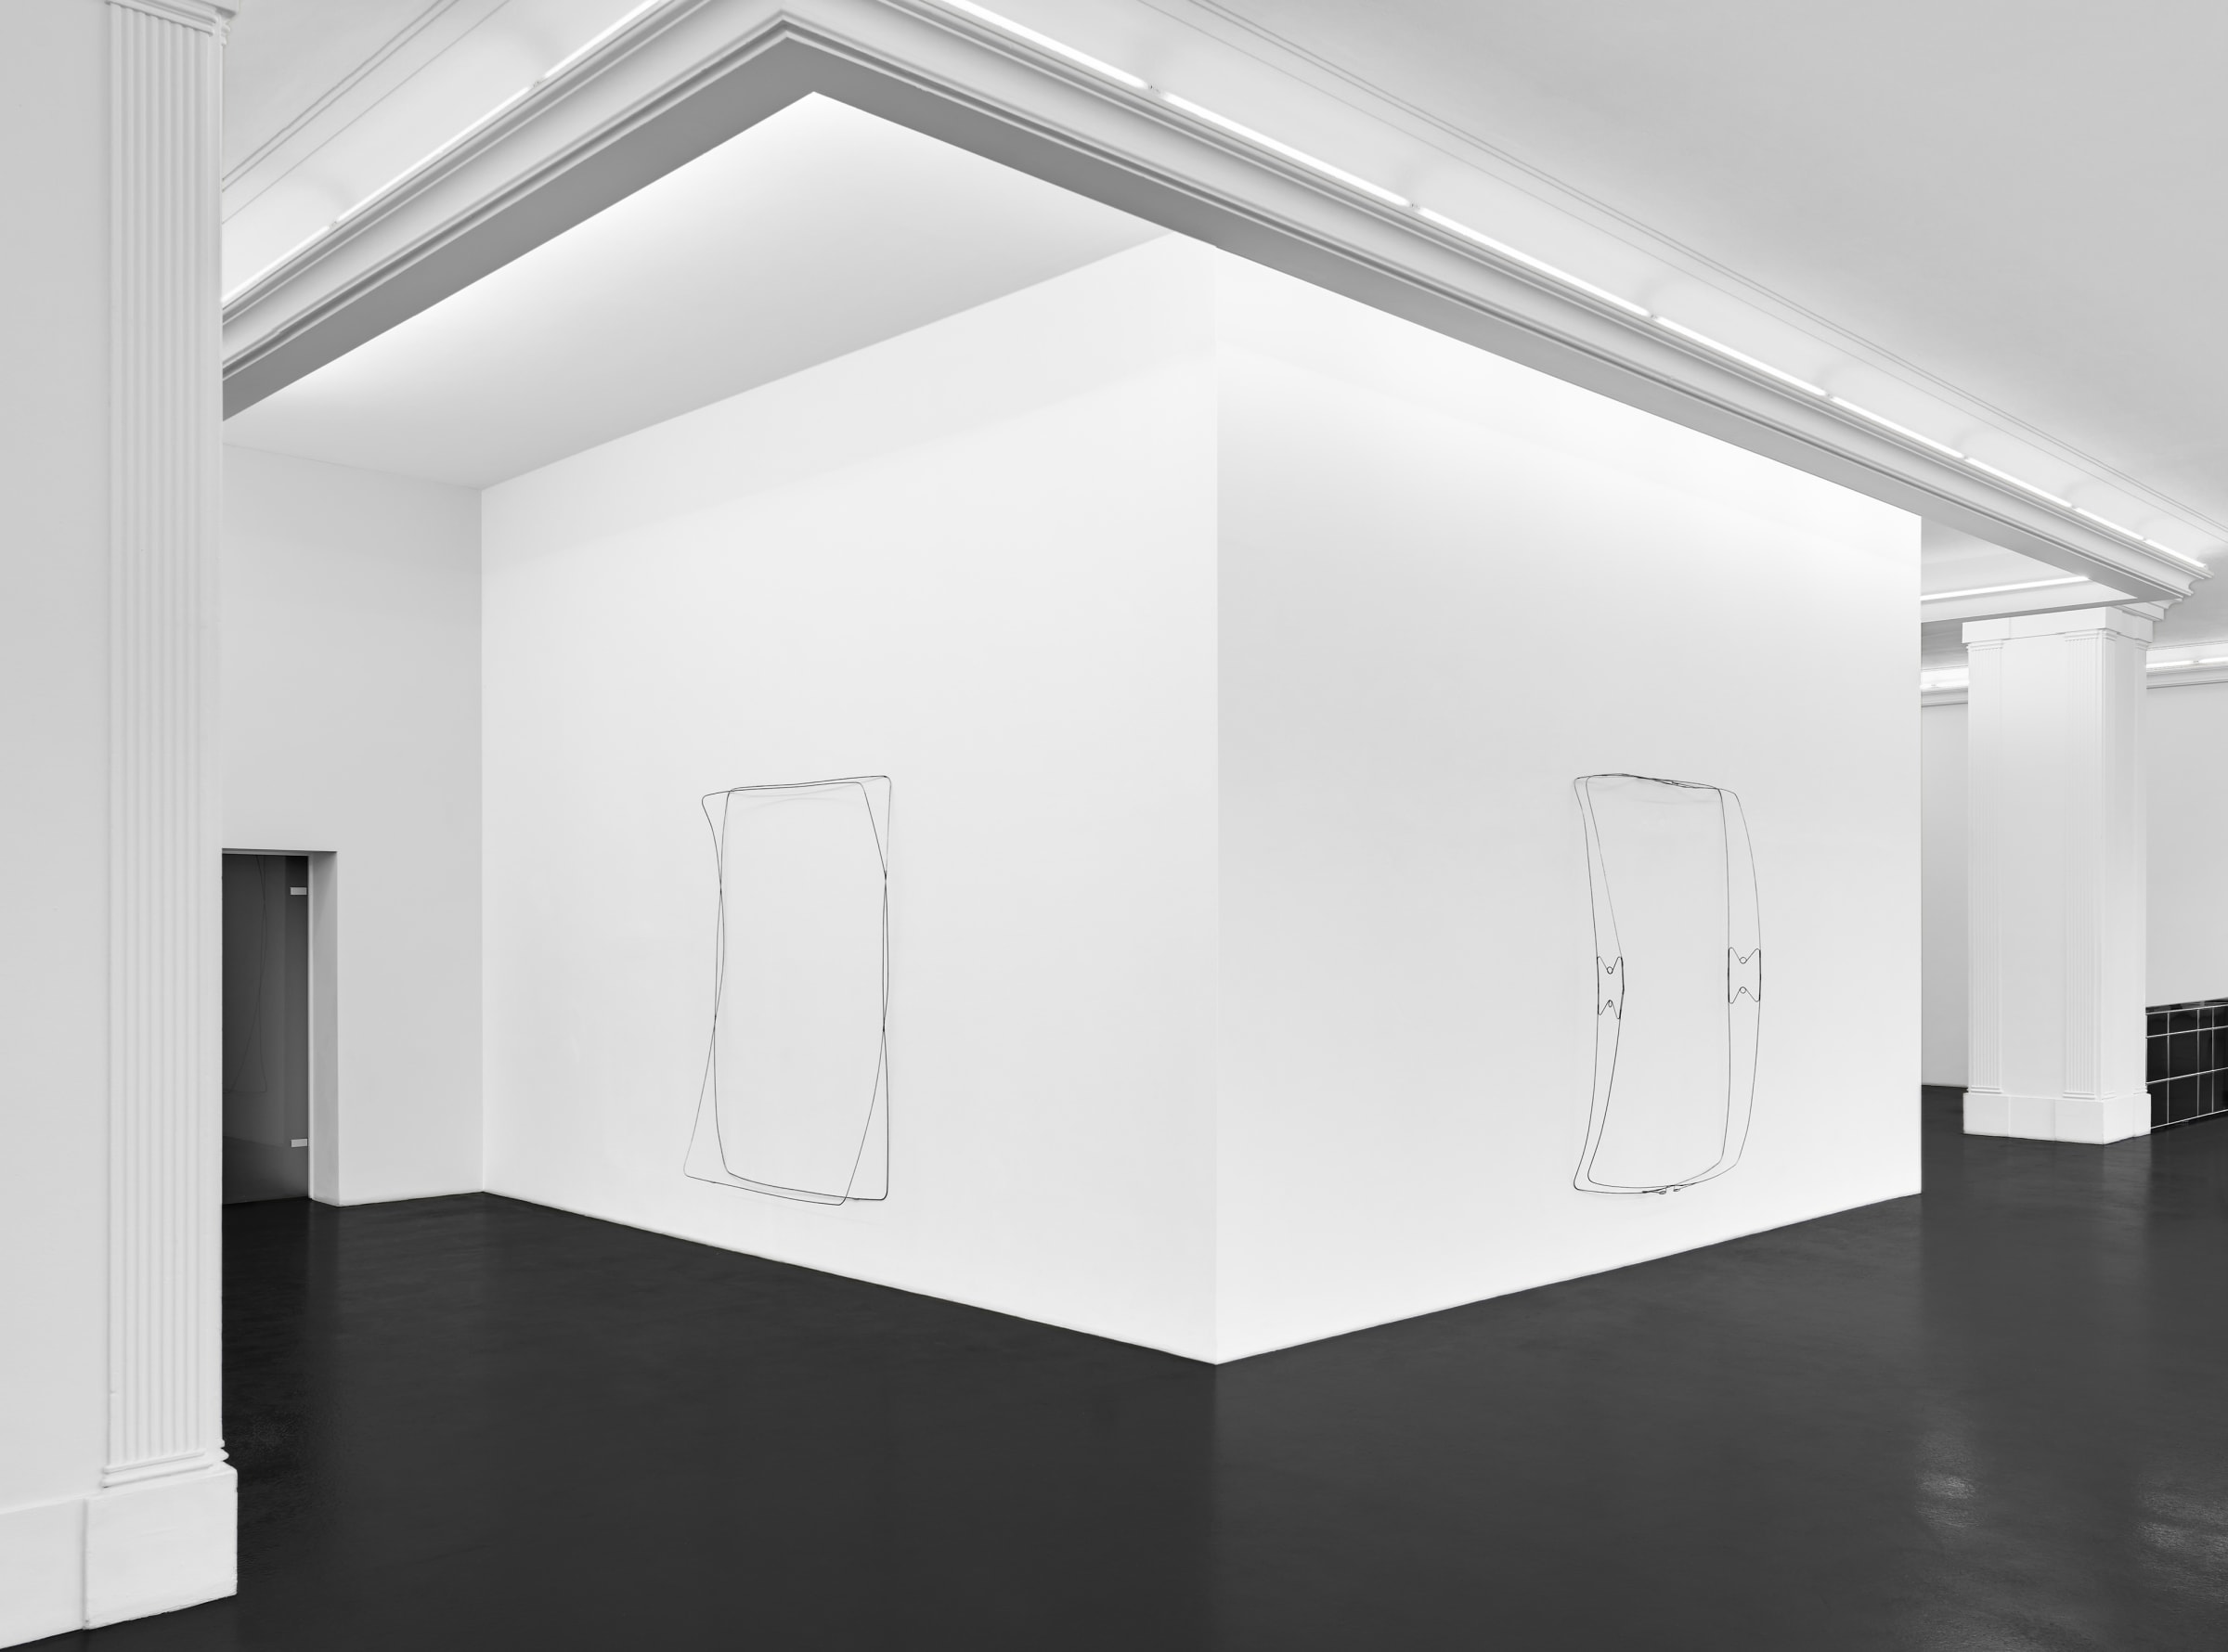 Bronwyn Katz Salvaged Letter Installation View November 15, 2019 – January 10, 2020 Peres Projects, Berlin Photographed by: Matthias Kolb